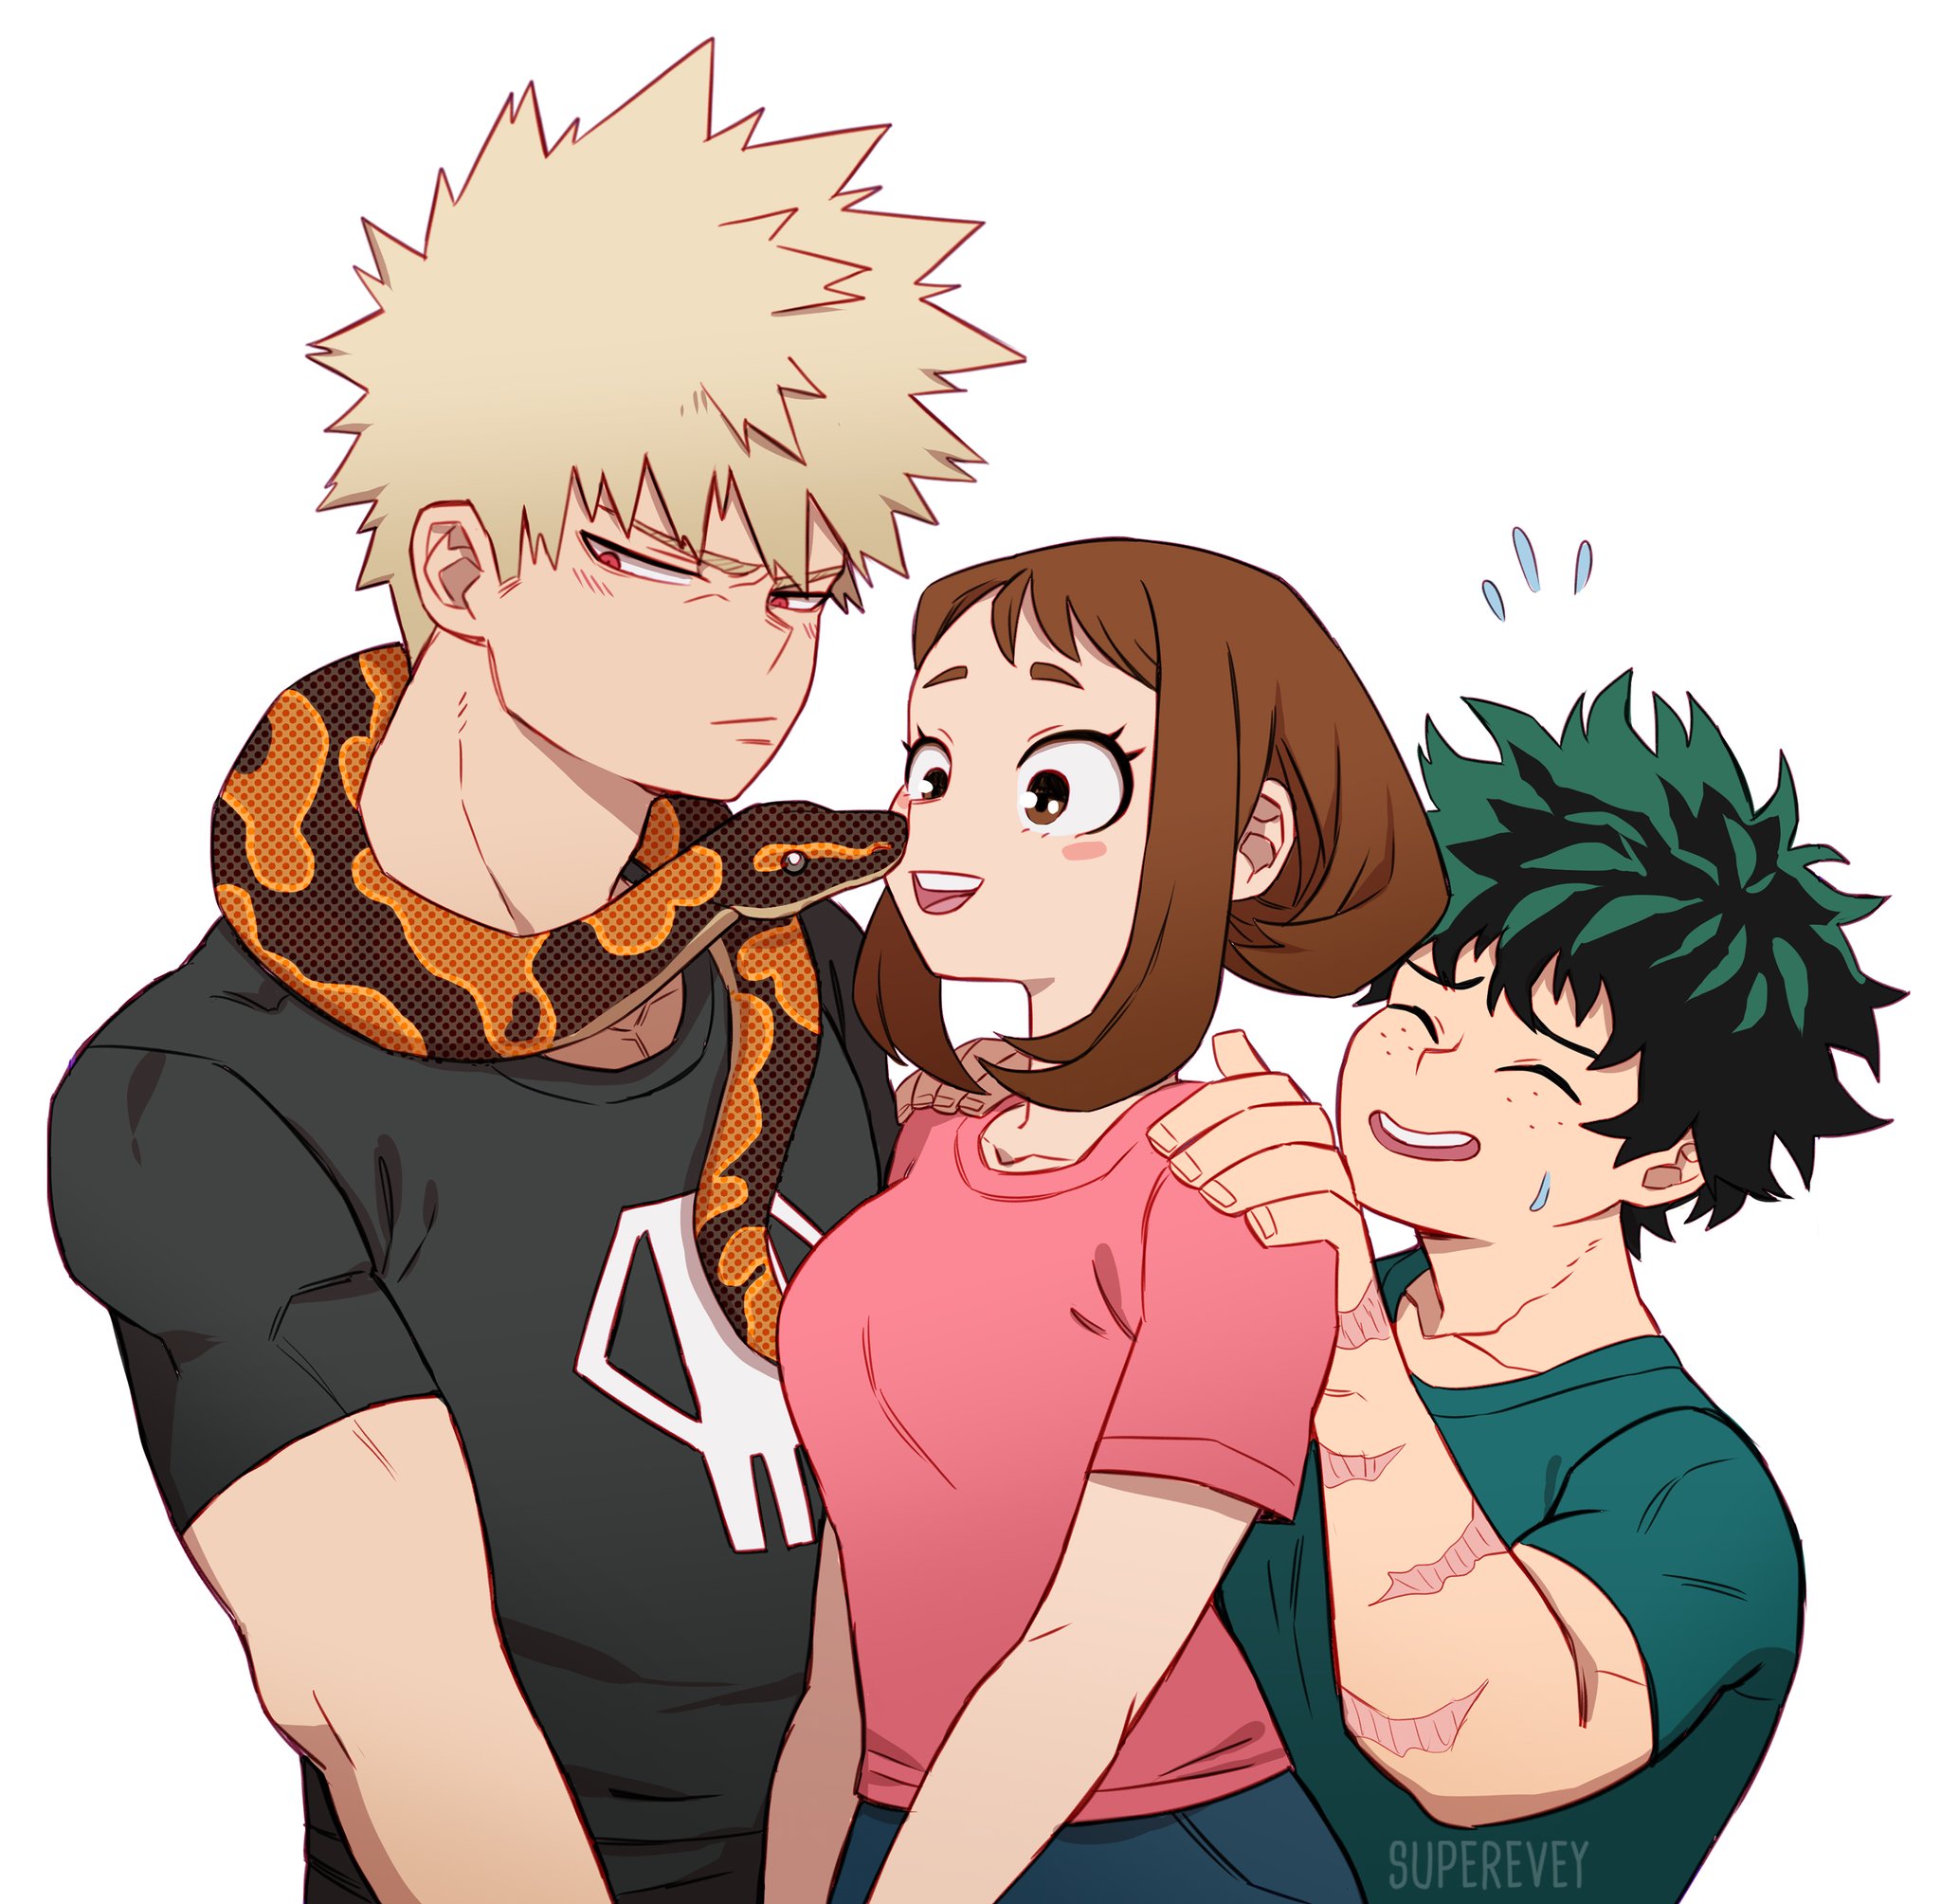 “My late Birthday Gift for @unlucky ! 😘 #kacchako I know u like this type ...